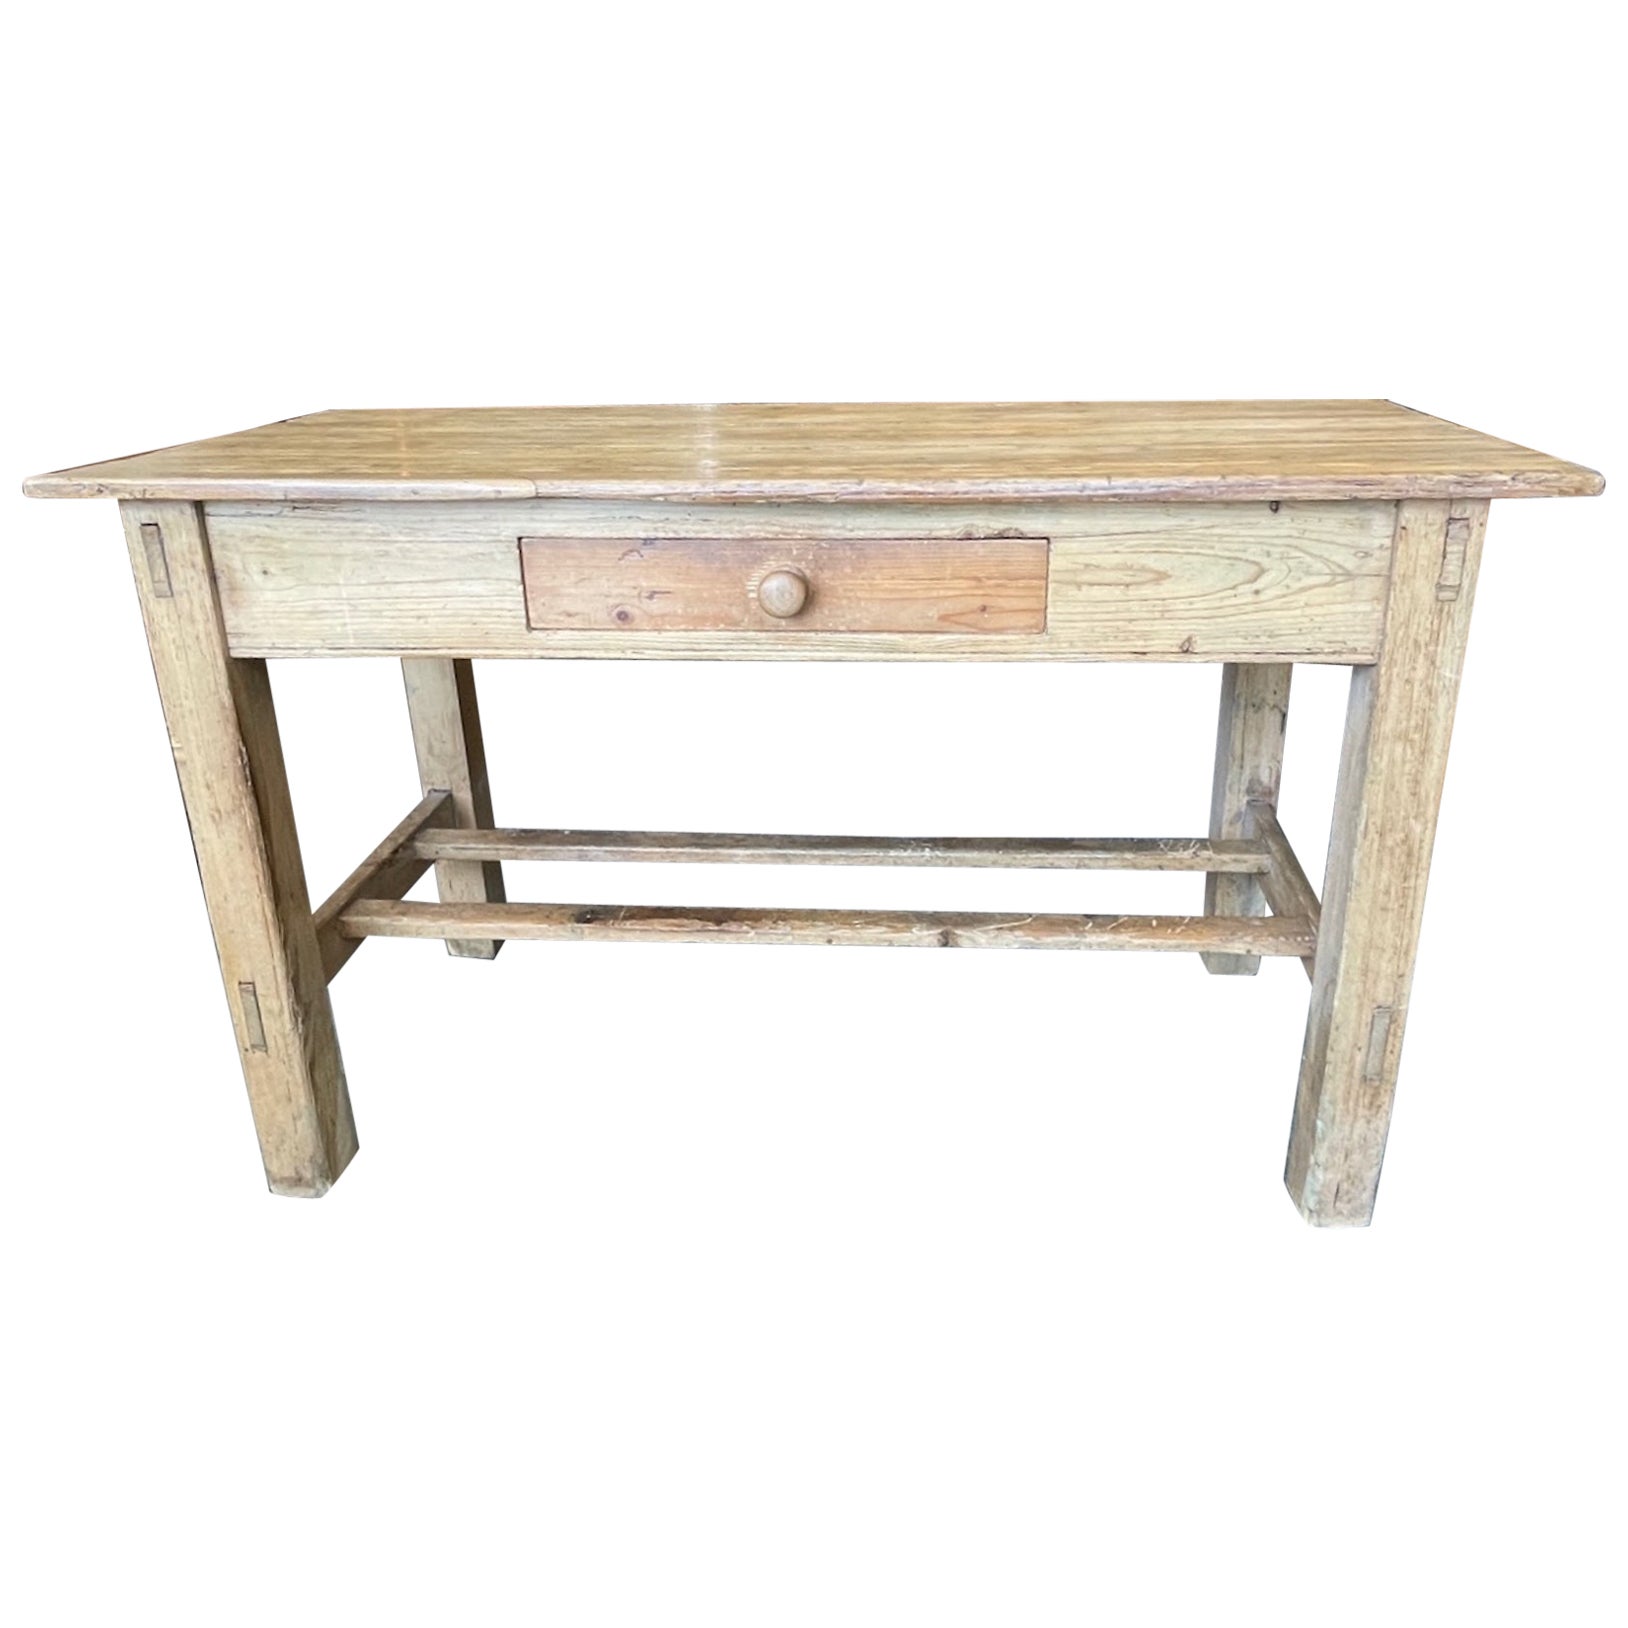 Irish 19th Century Pine Breakfast Table or Desk with One Center Drawer For Sale